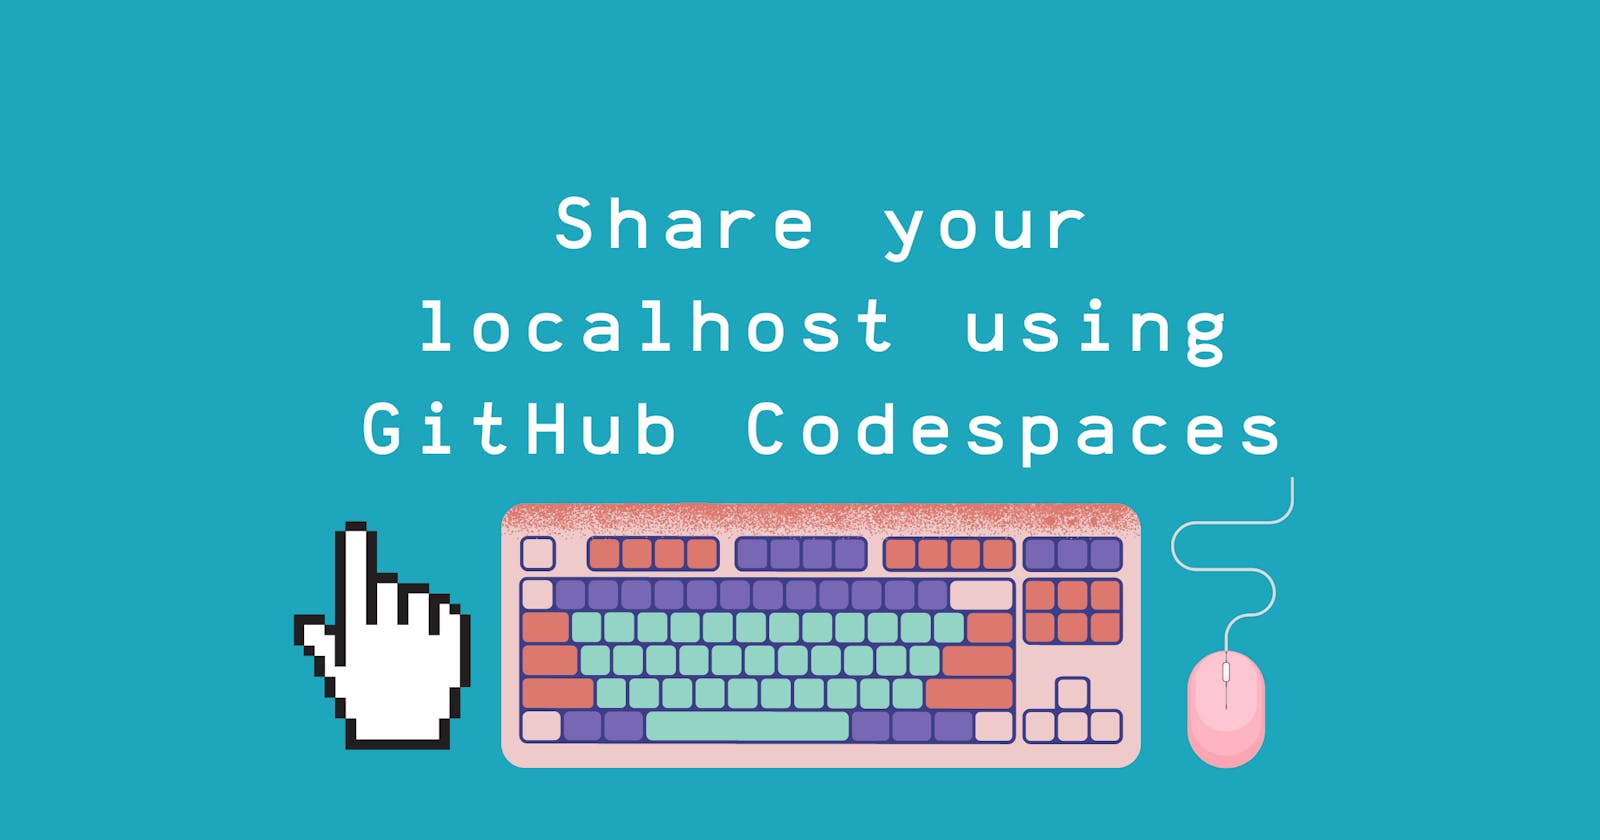 Share your locally hosted web app using Codespaces